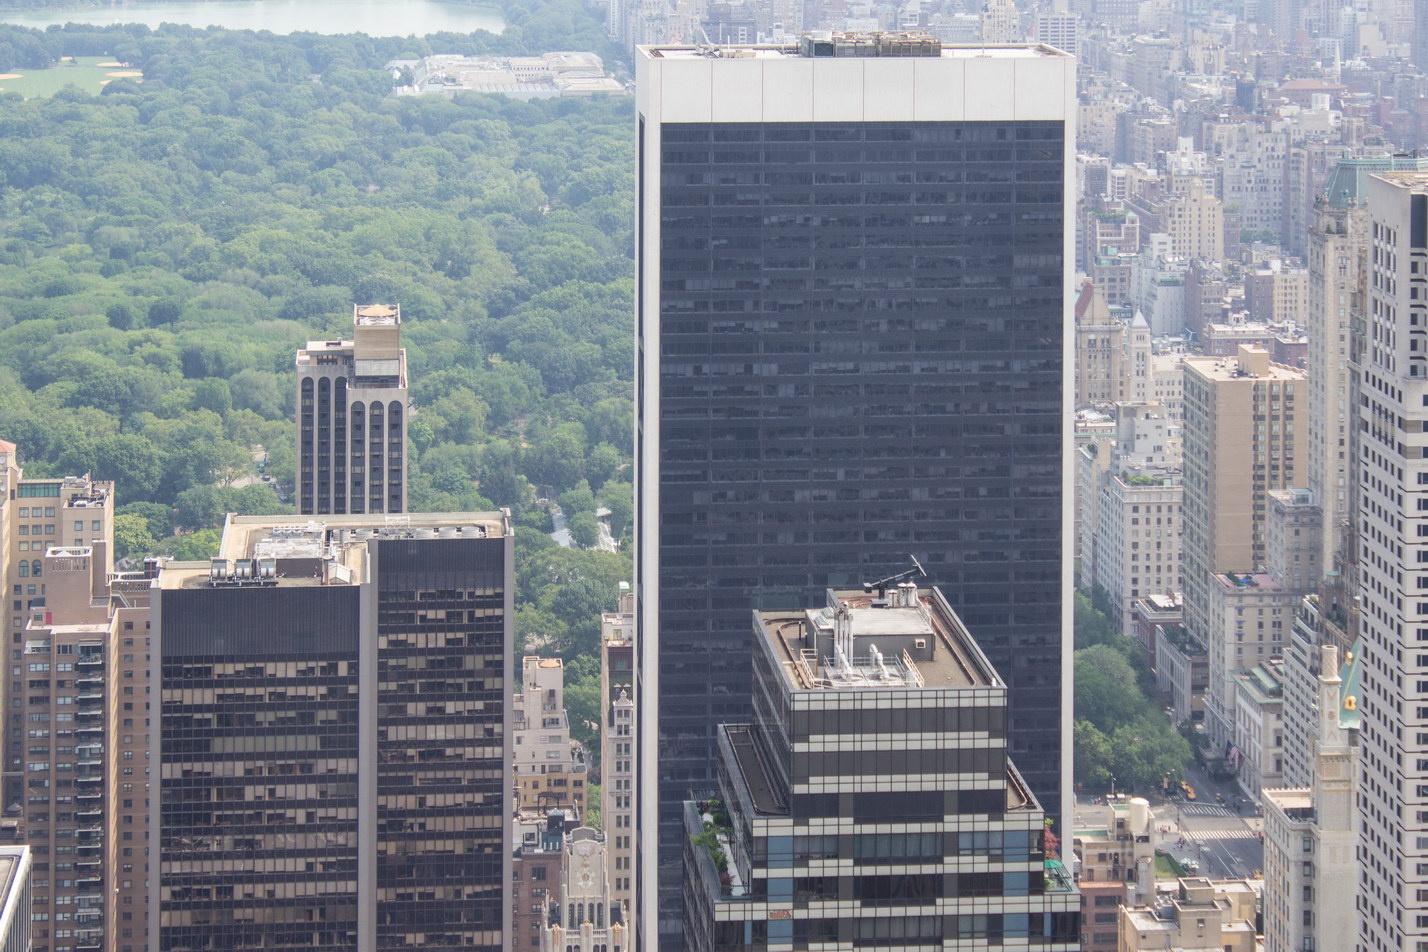 The 50-story Solow Building has commanding (and expensive) views of Central Park.